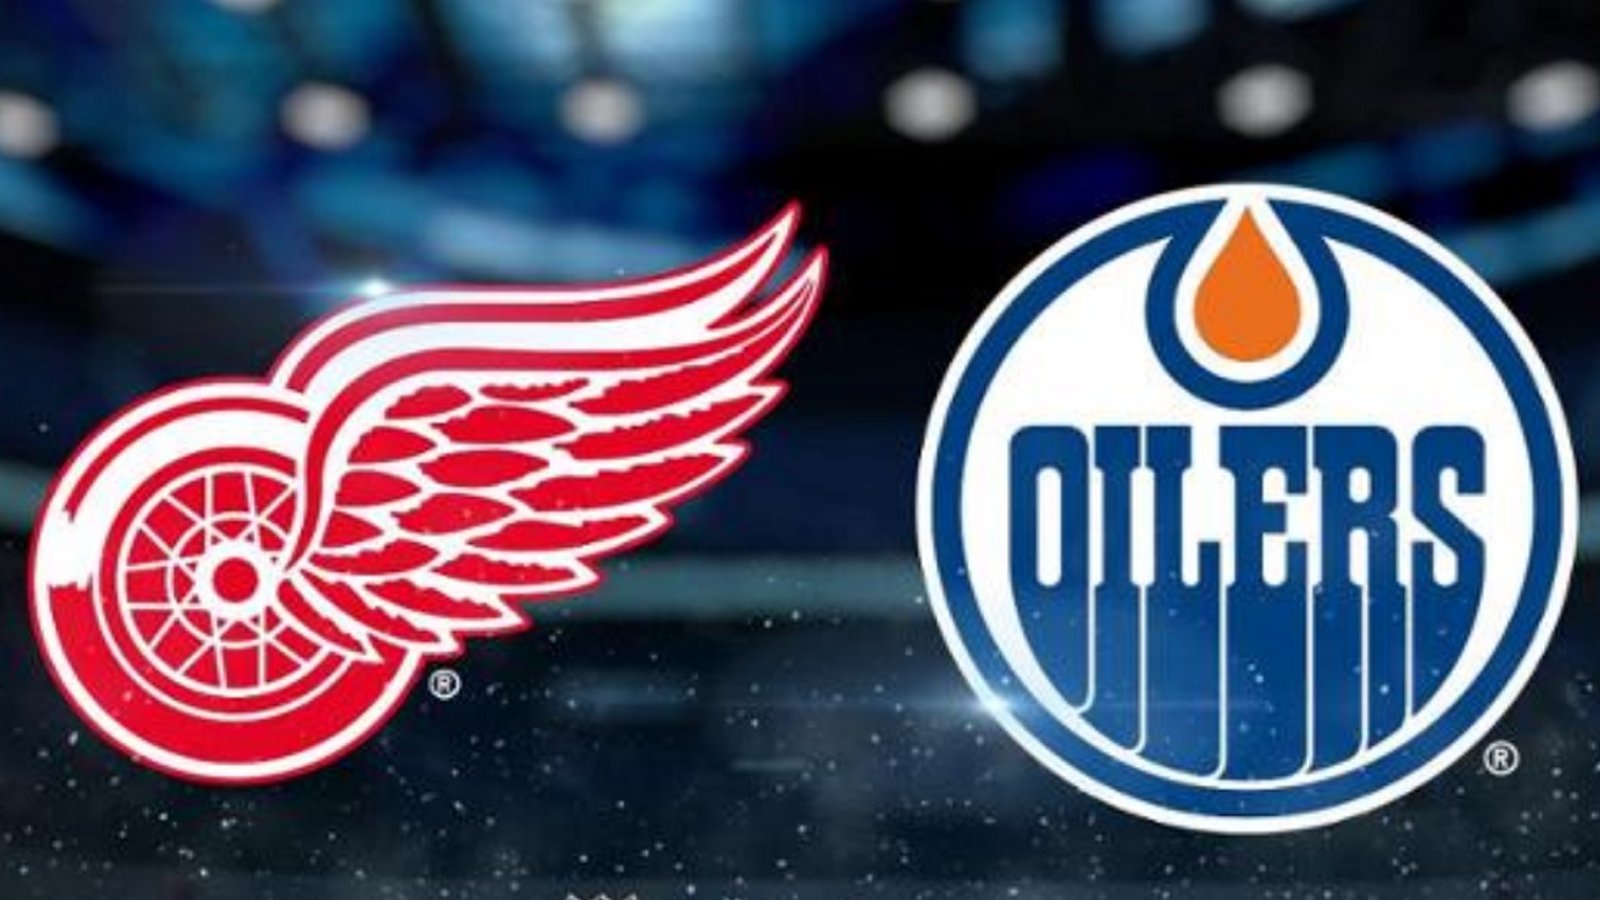 2 player trade proposed between Red Wings and Oilers.